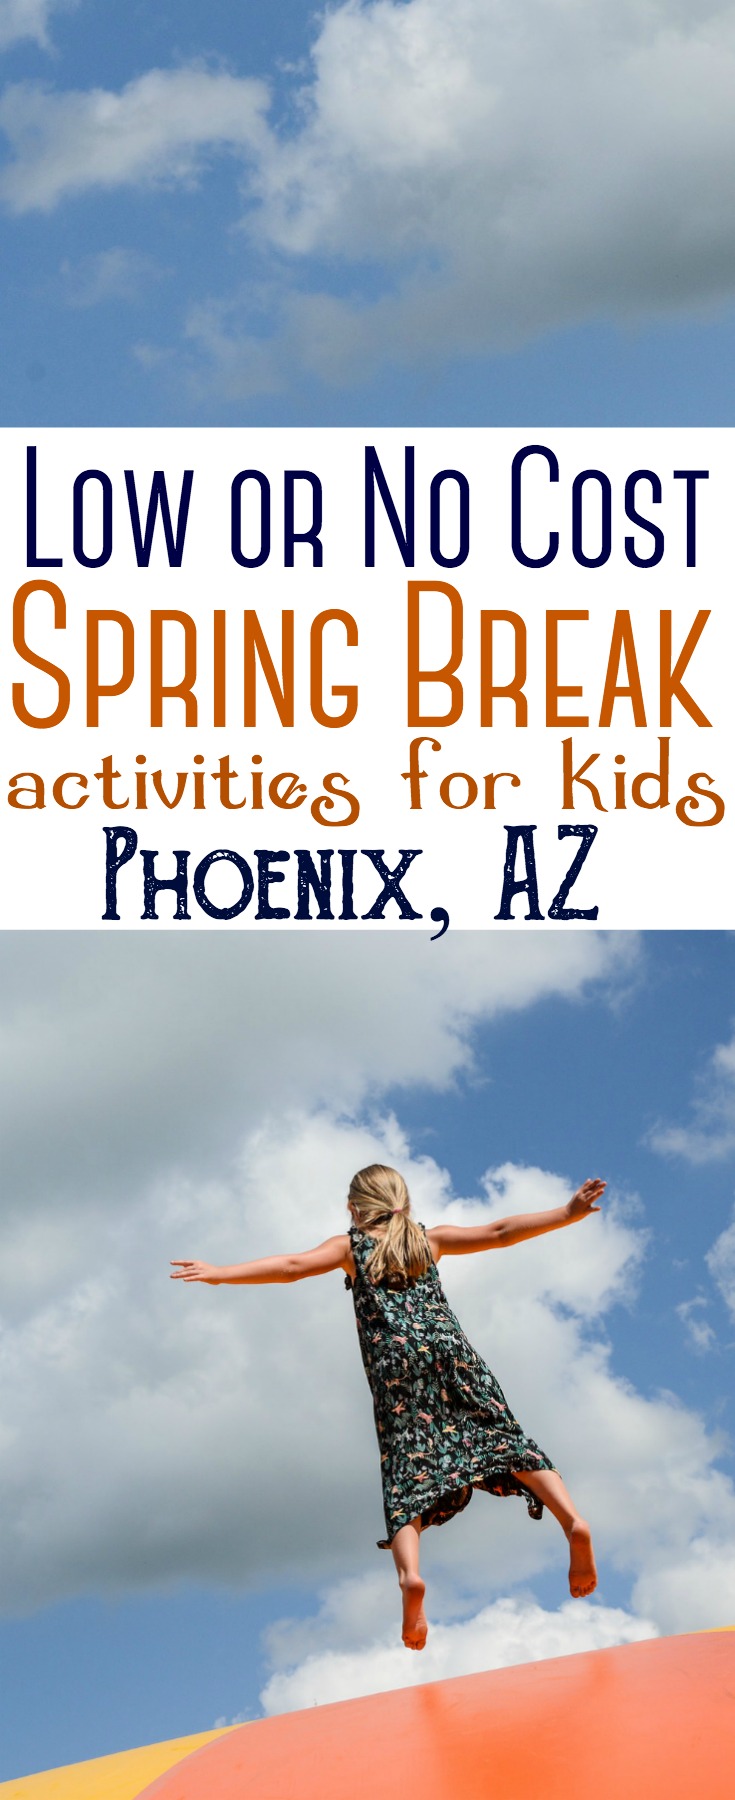 Kids on spring break? Here are a variety of fun and inexpensive things for them to do! #Phoenix #Arizona #SpringBreak #Kids #Activities #AZ 